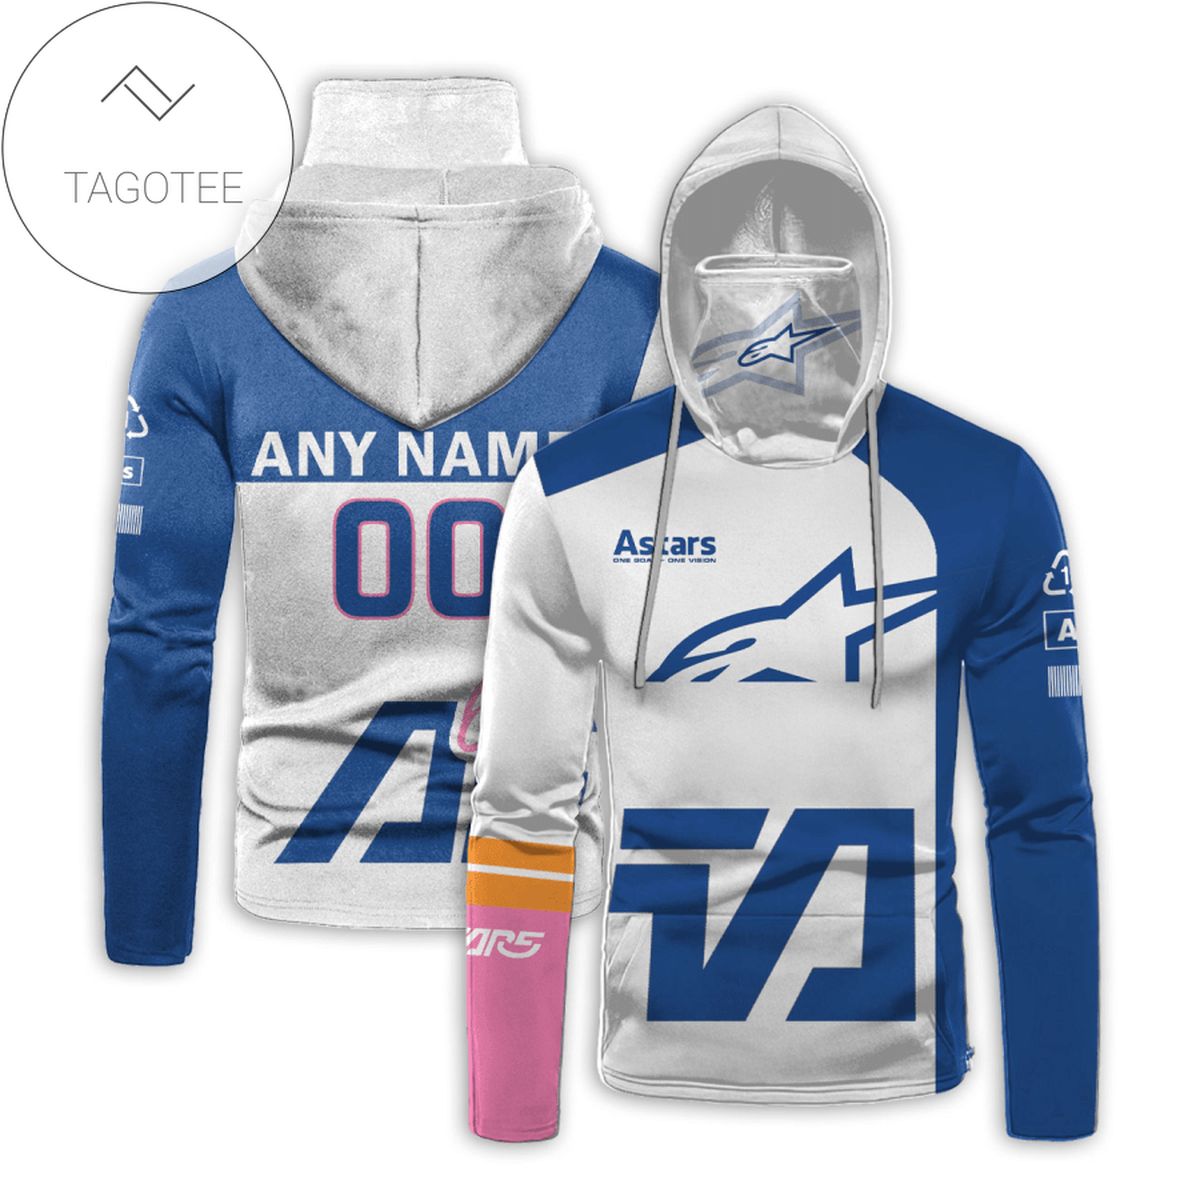 Personalized Astars Motogp Racing All Over Print 3D Gaiter Hoodie - White